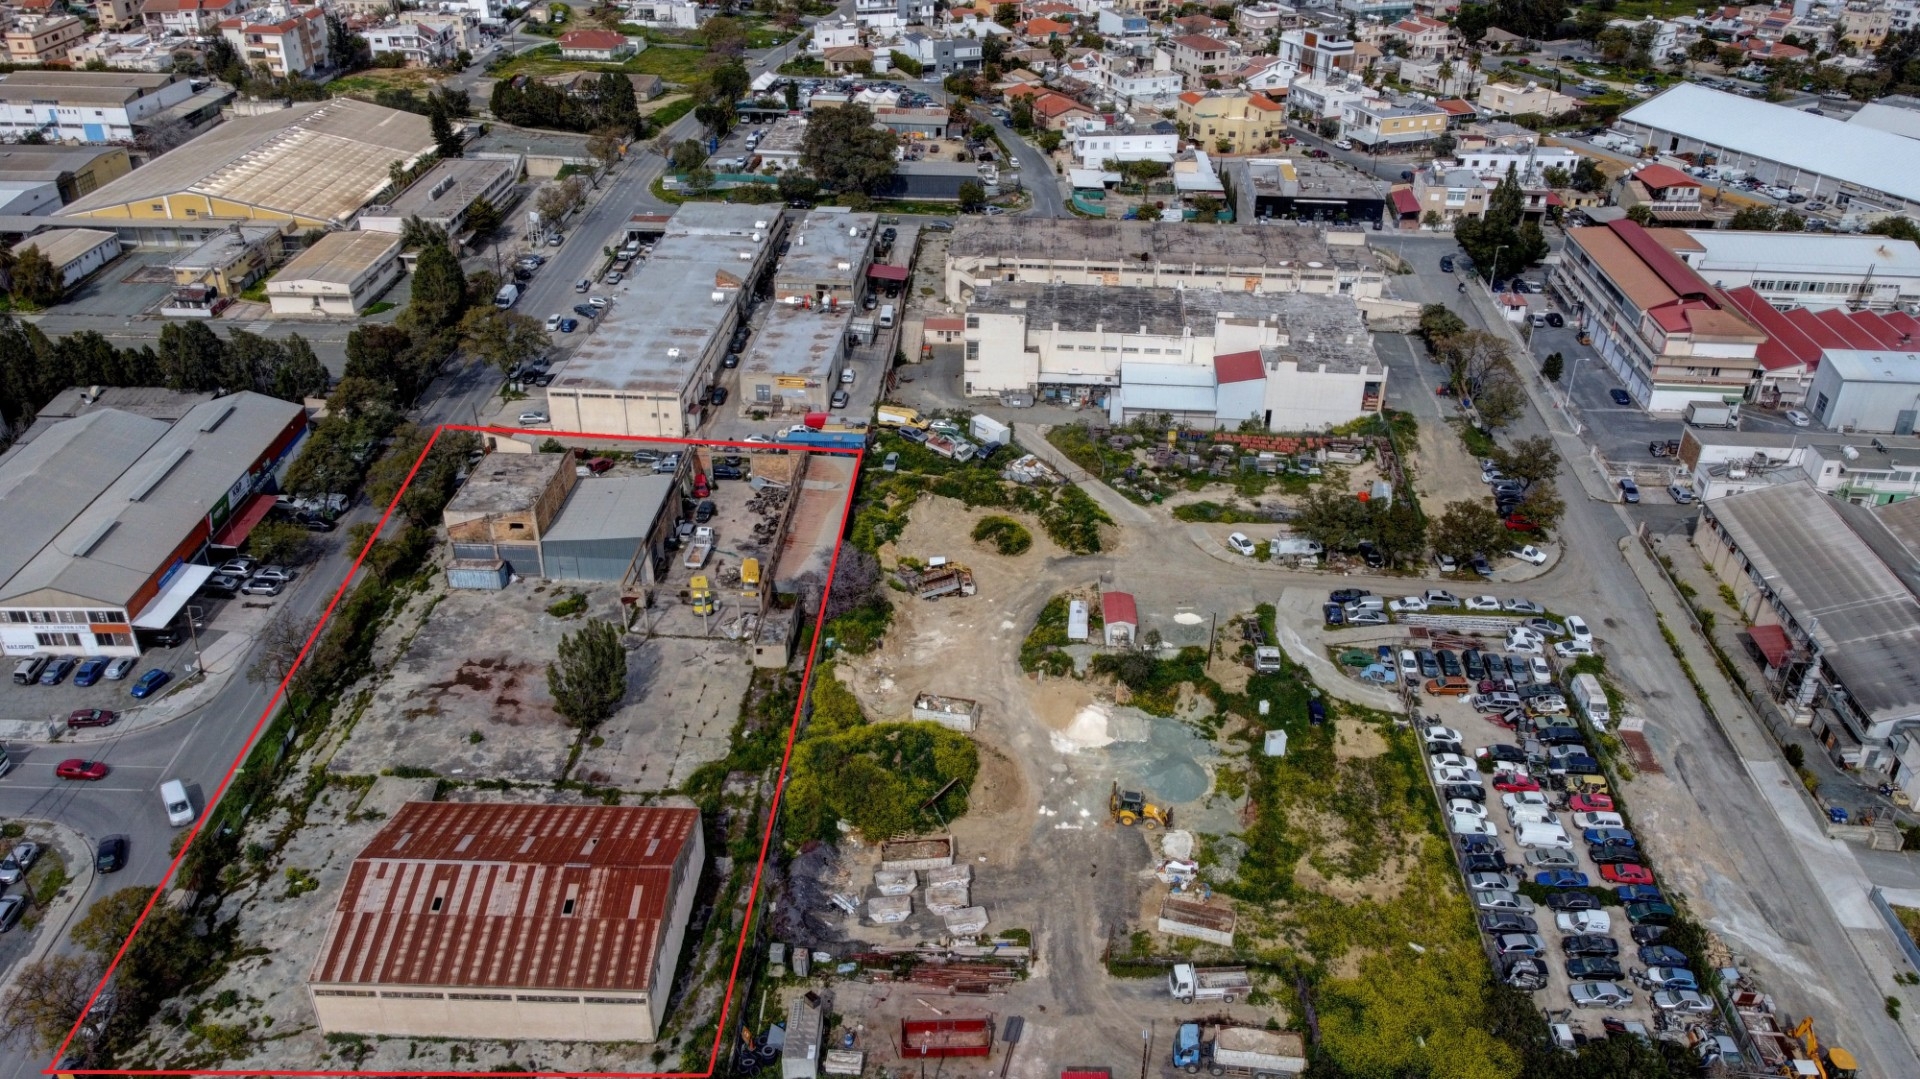 5,045m² Commercial Plot for Sale in Nicosia – Kaimakli